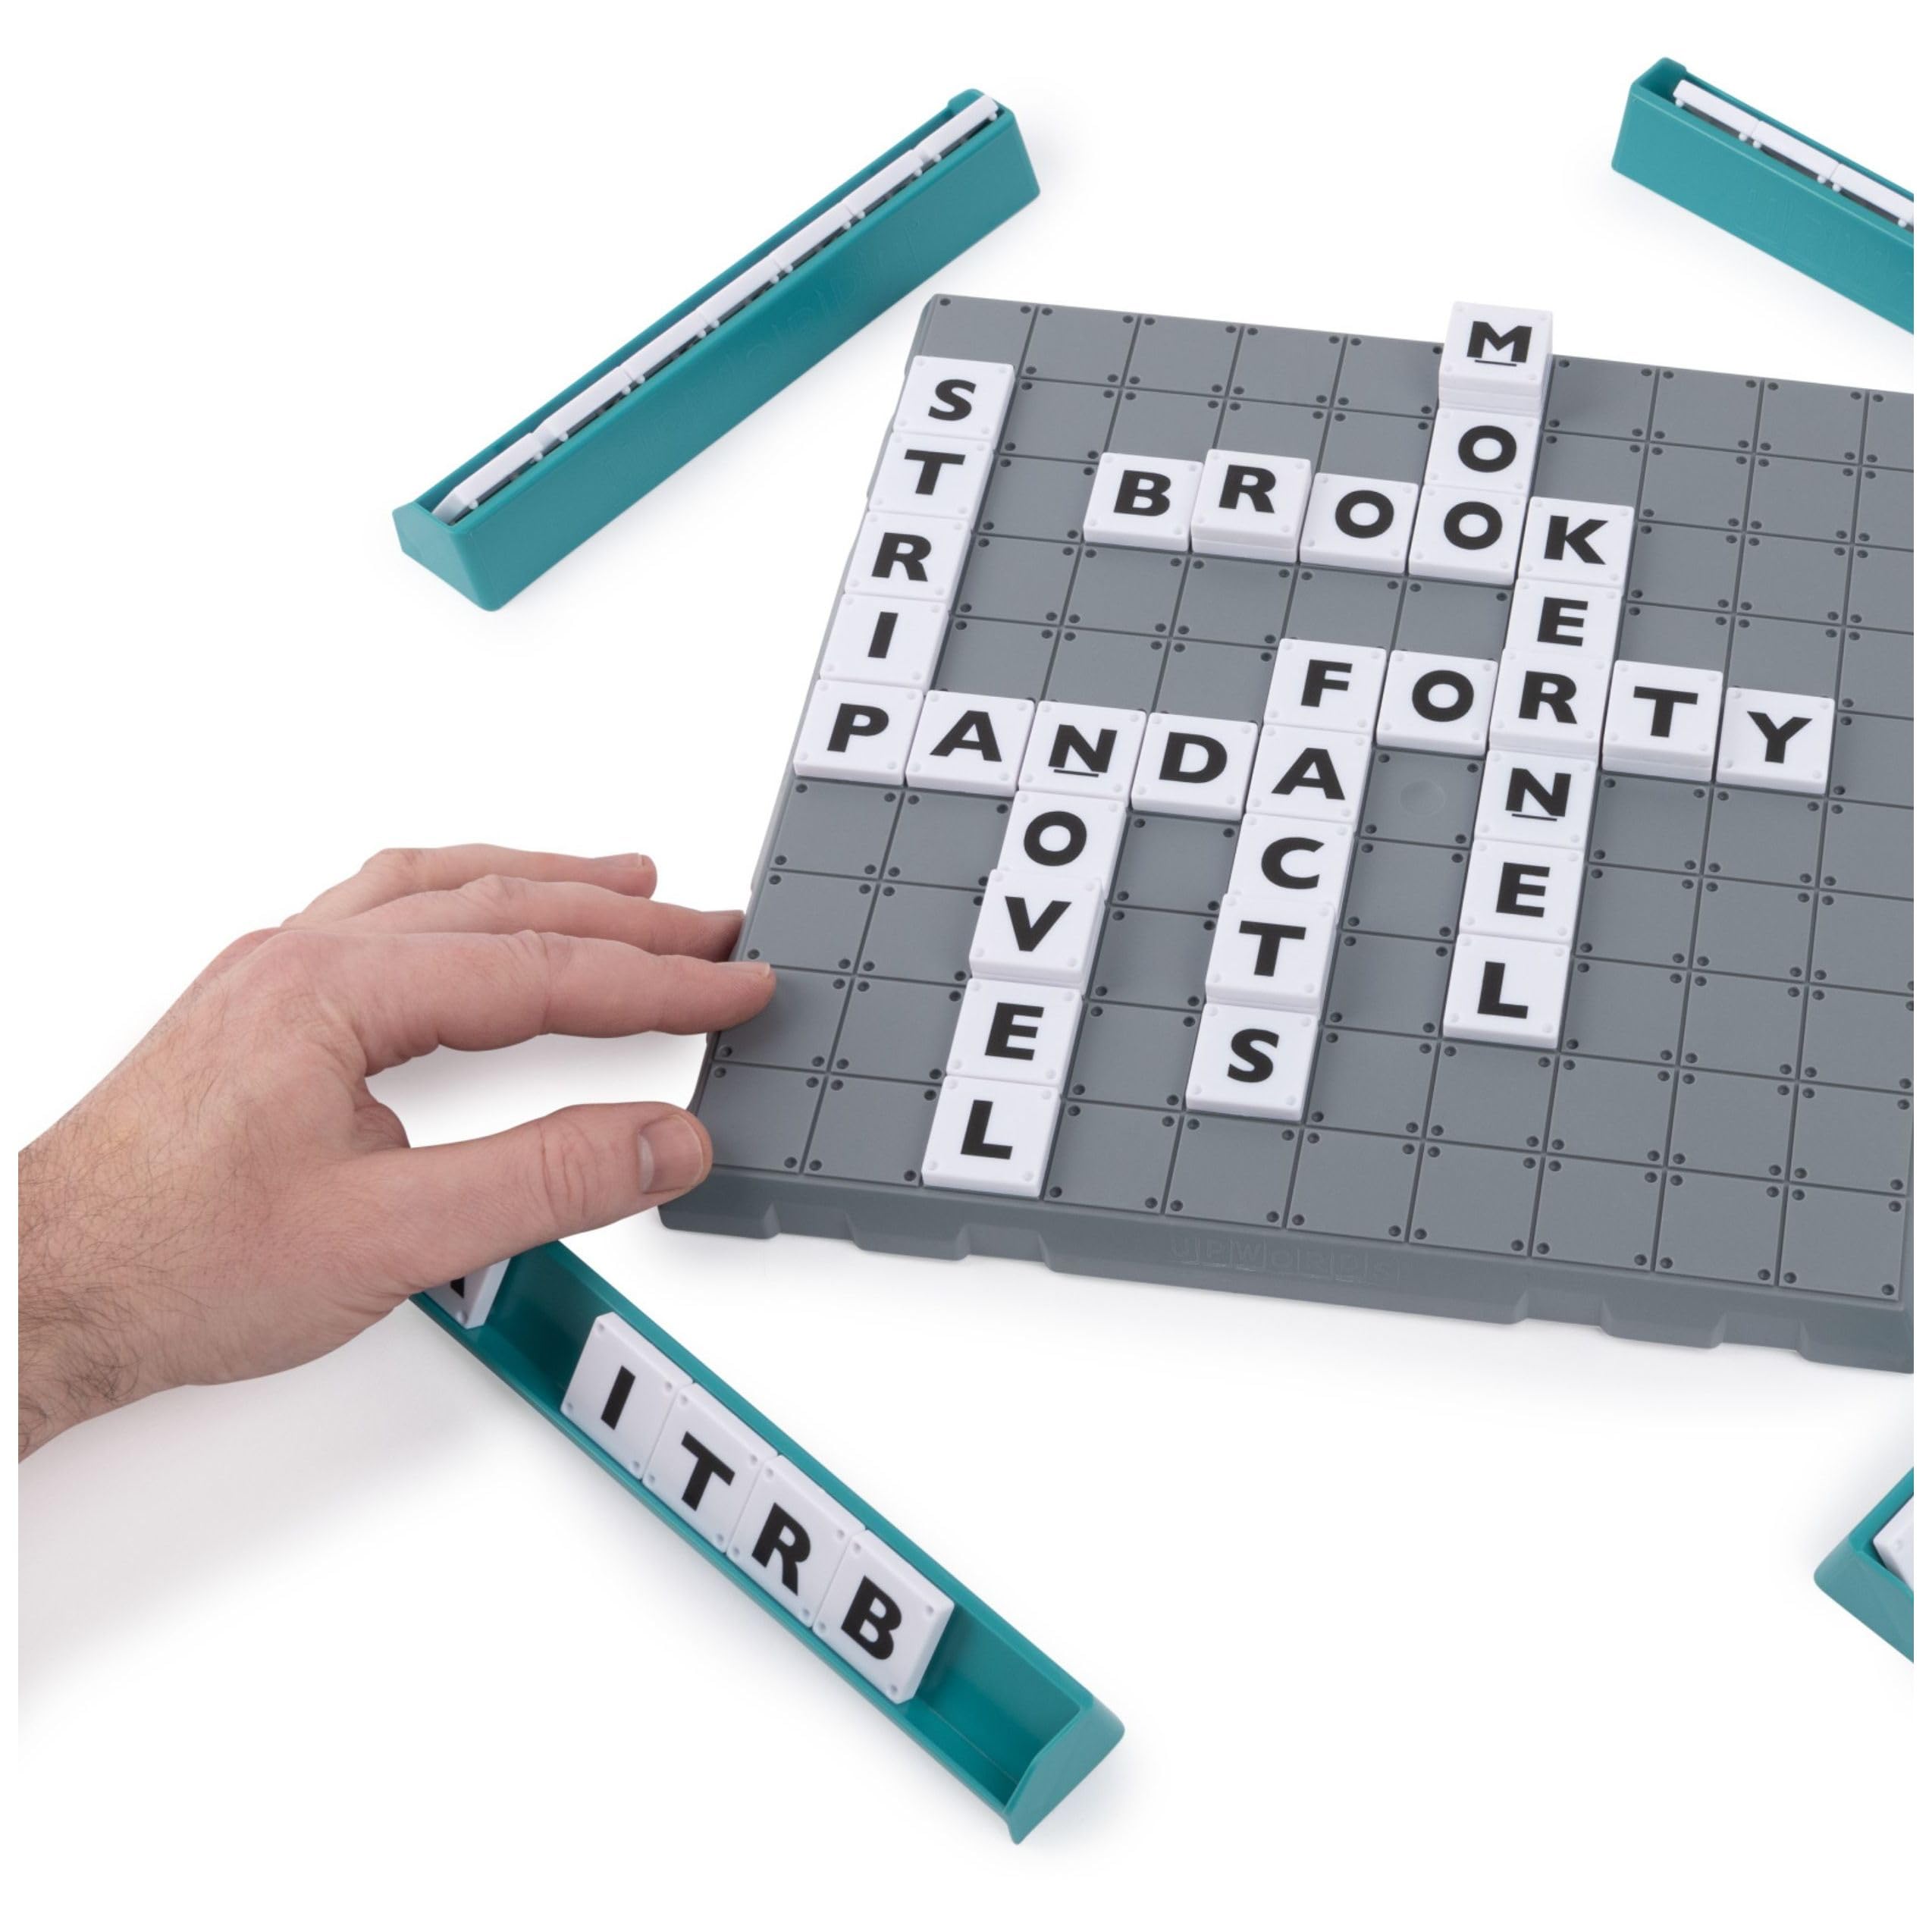 Upwords, Word Game with Stackable Letter Tiles & Rotating Game Board | Games for Family Game Night | Family Games, for Adults and Kids Ages 8 and up